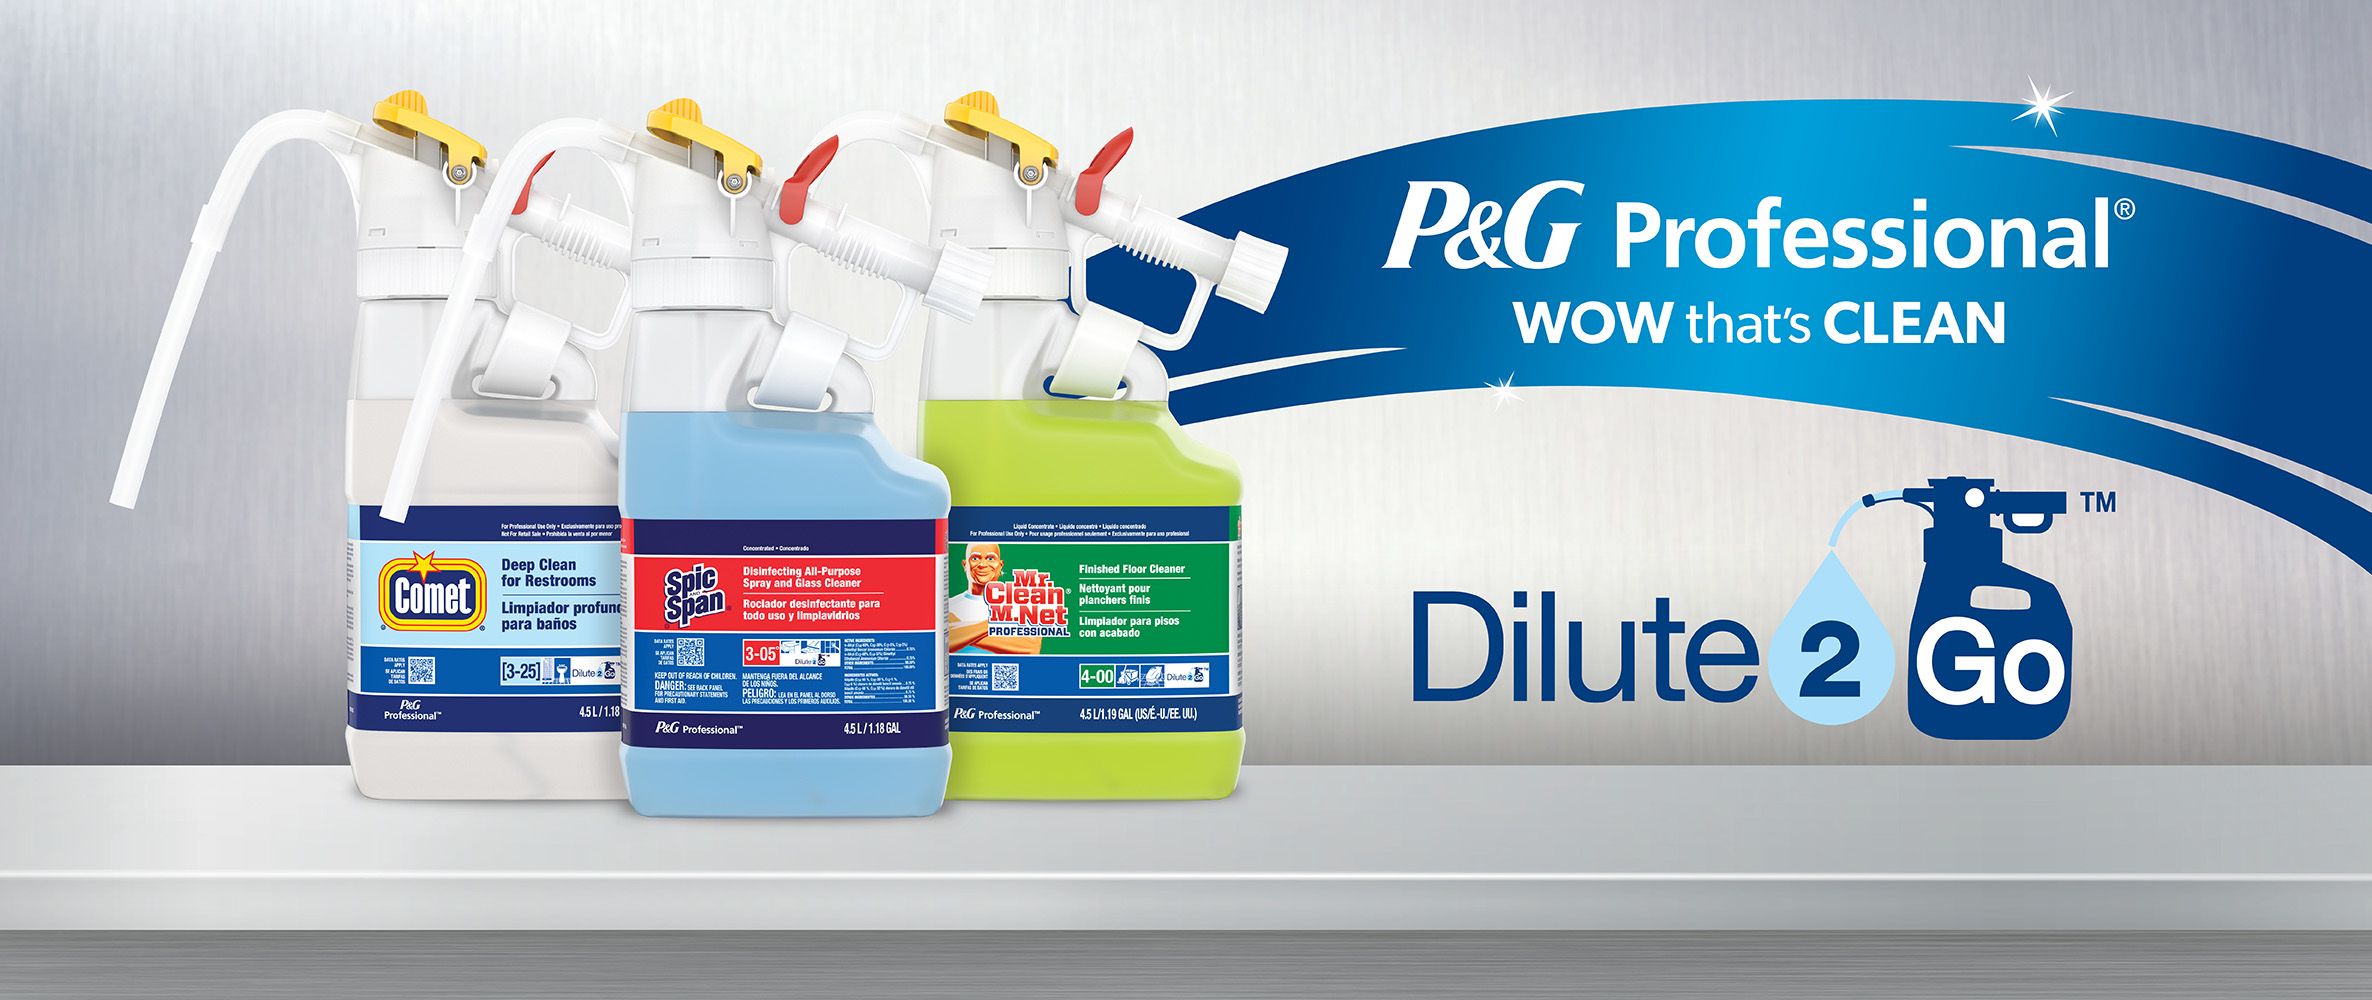 Dilute 2 Go | Easy Powerful and Portable | P&G Professional